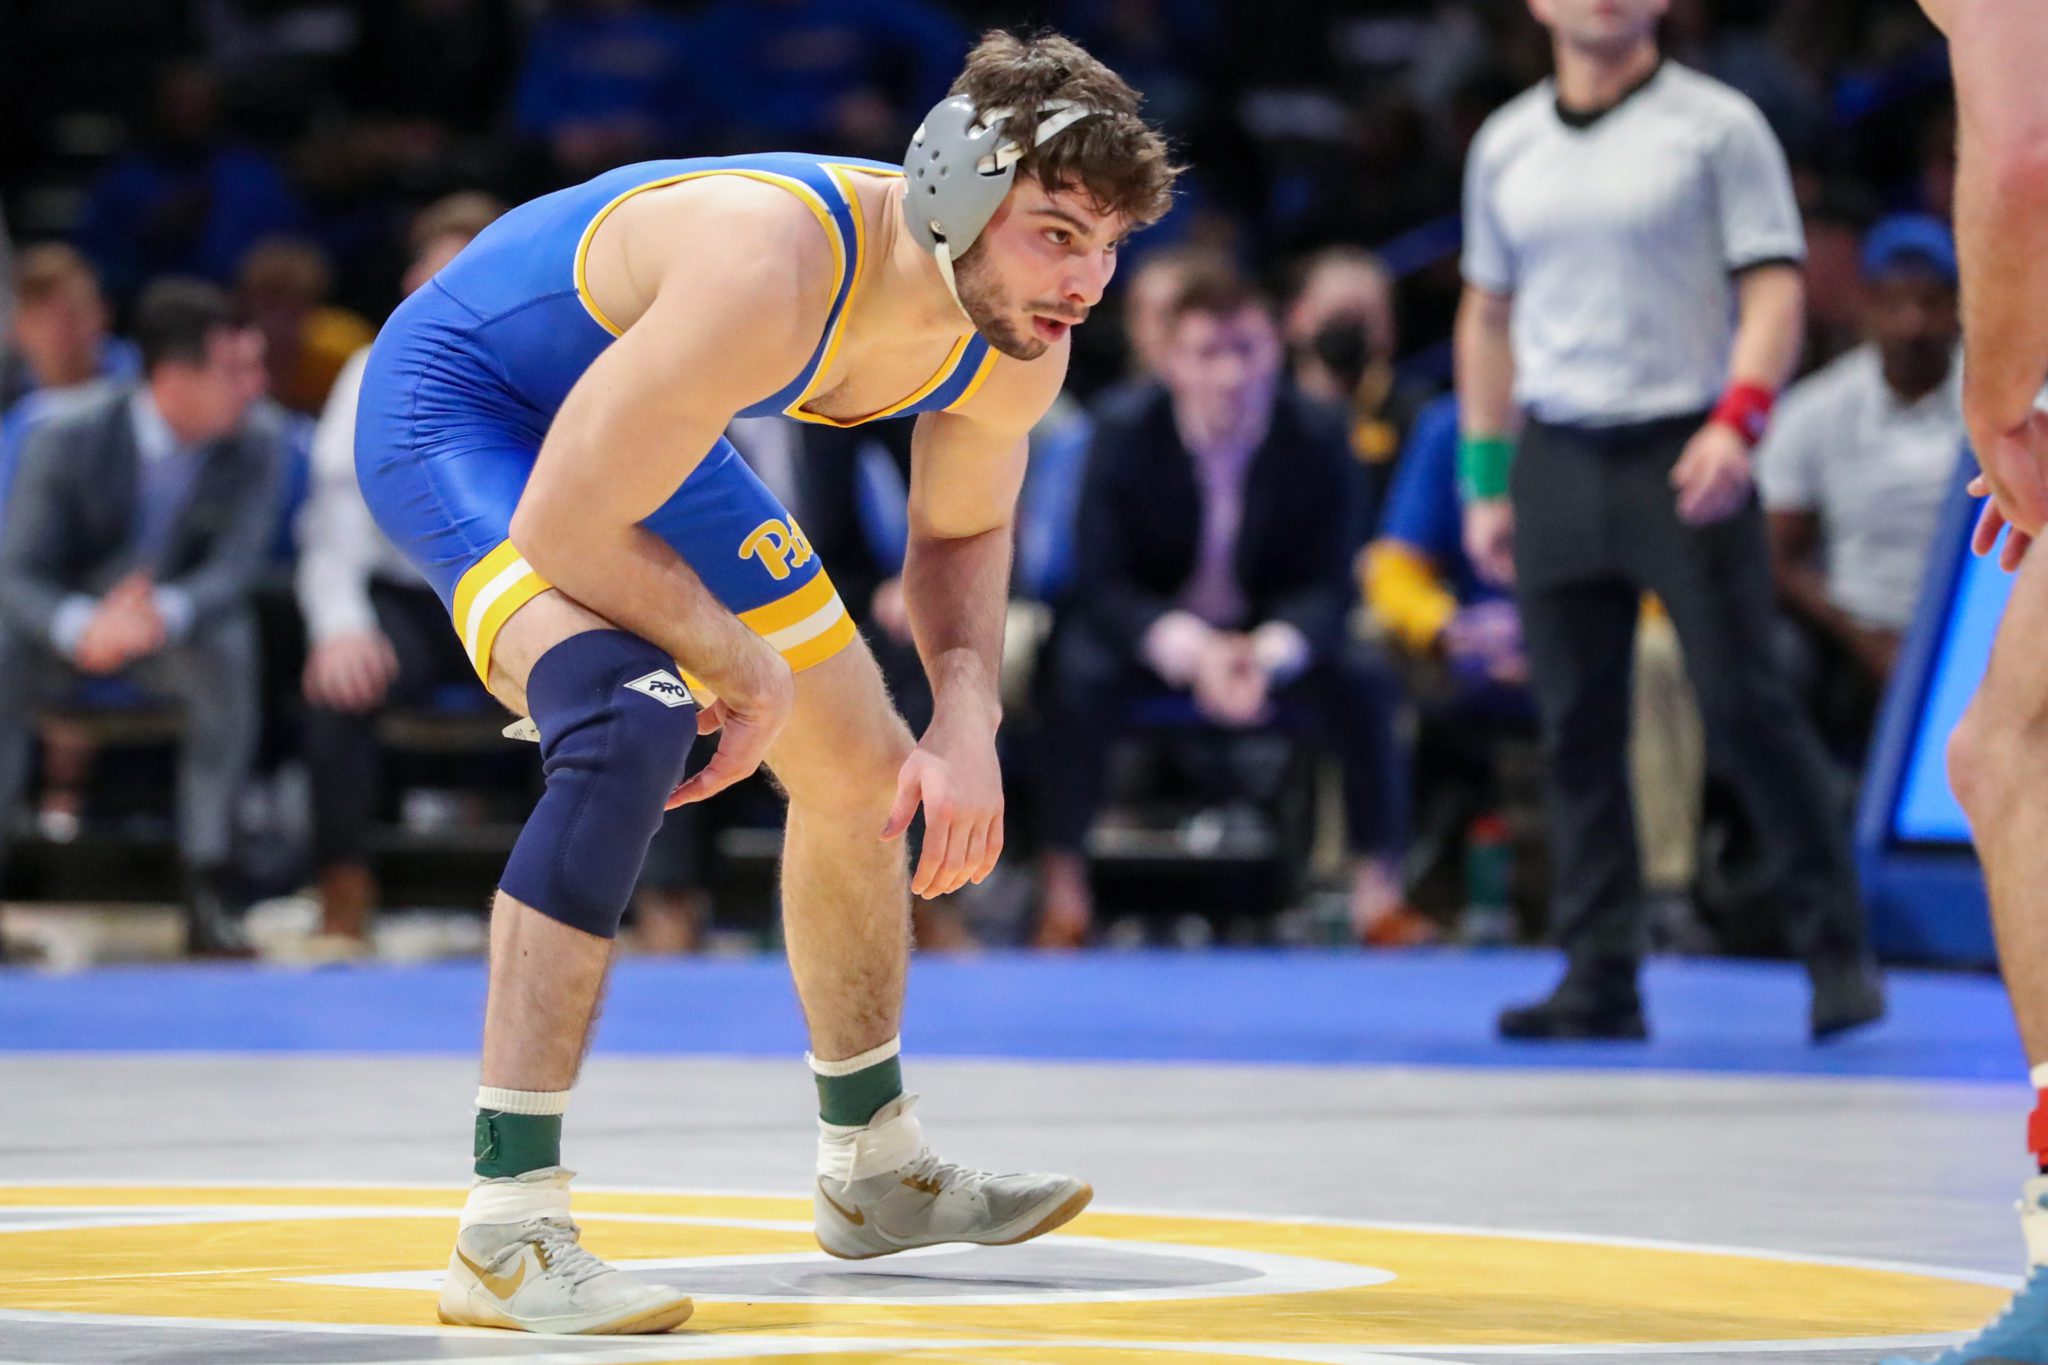 NCAA Wrestling Championships 2022 results: Complete 1st-round results,  matchups, pairings, seeds 